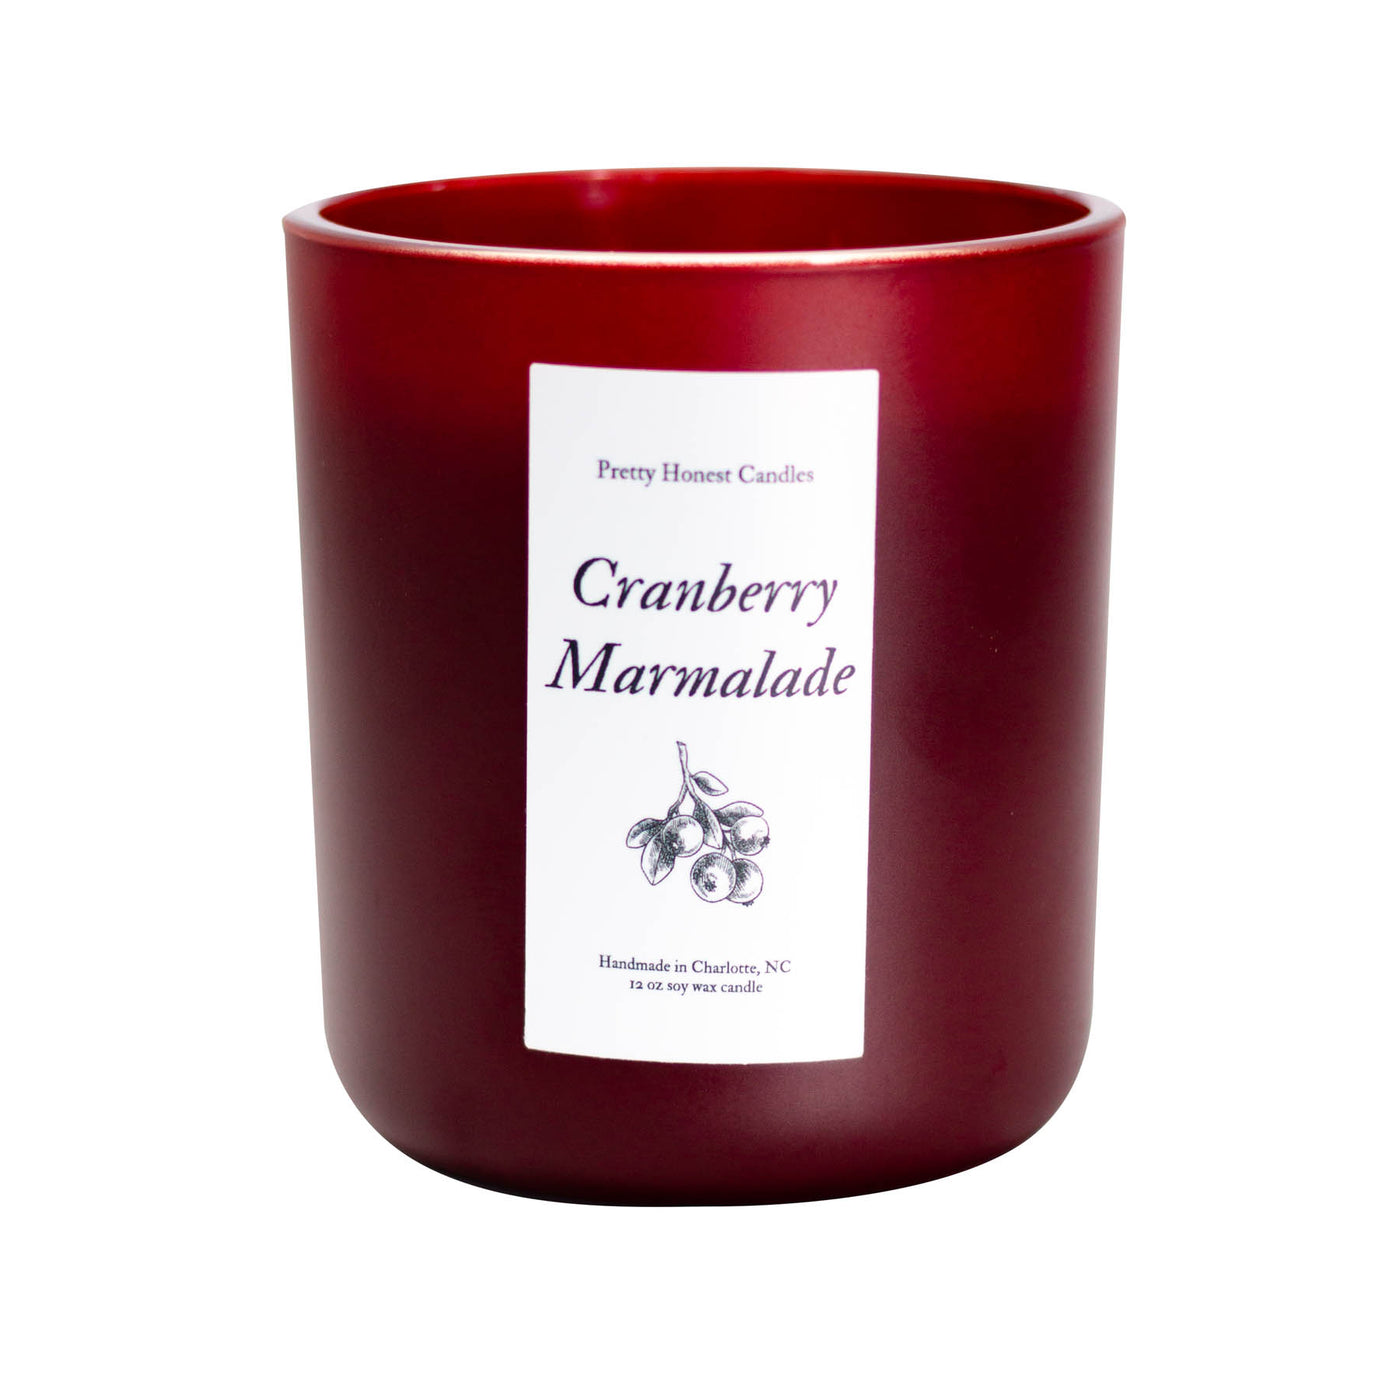 Mixed Berry parfait Handcrafted 26 oz Candle Organic Soy Wax w/ Lead Free  Wick